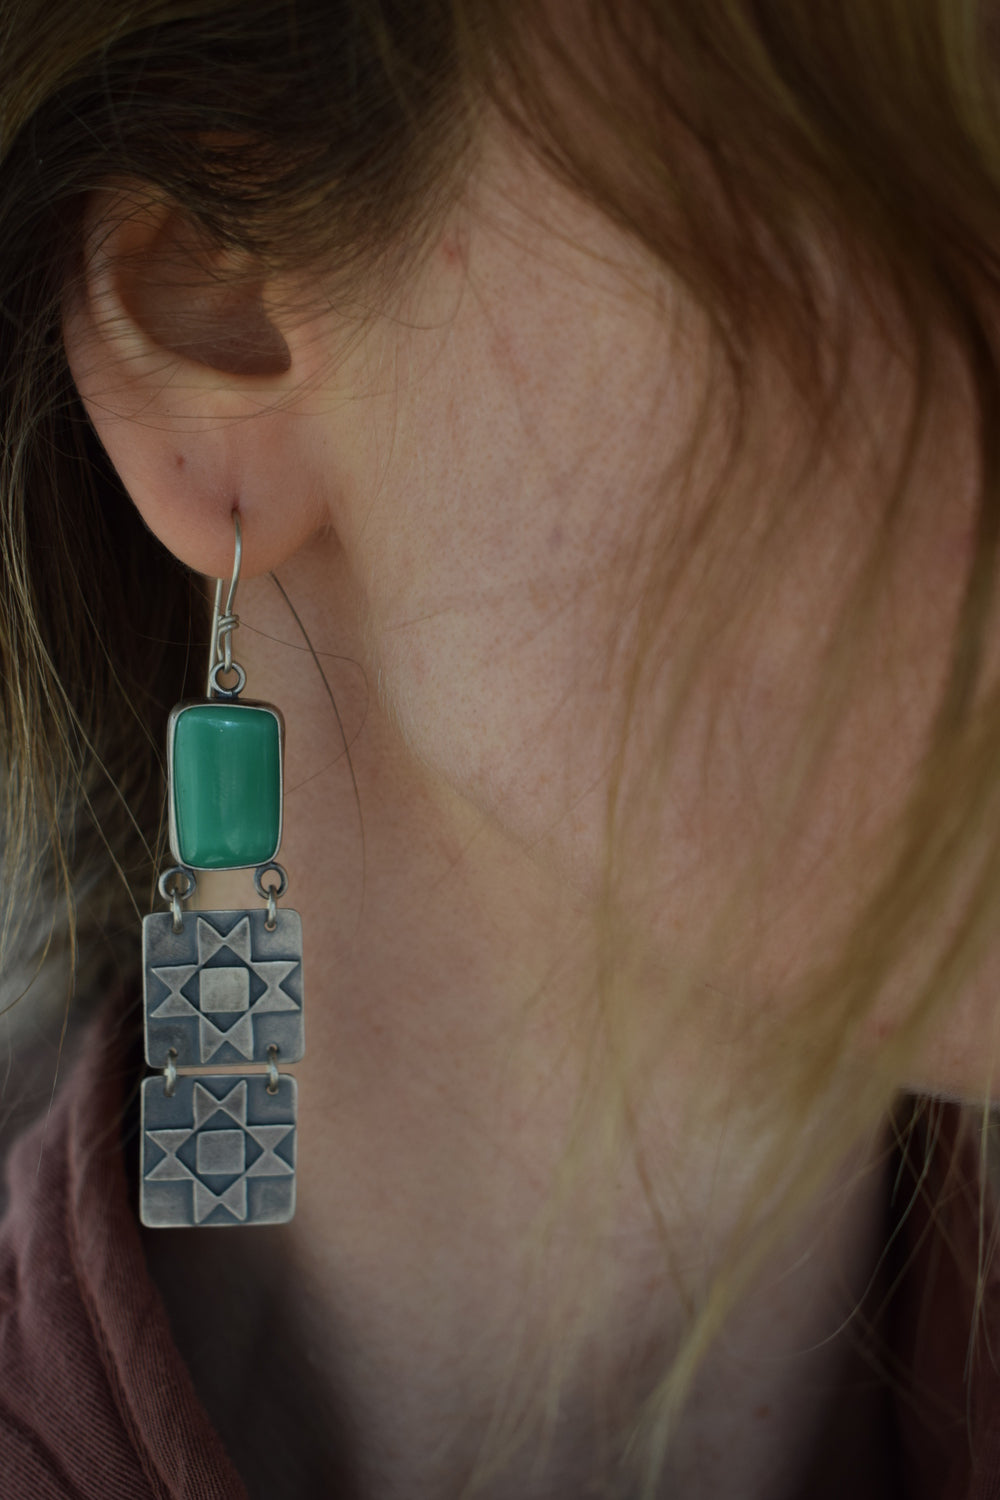 Variscite Quilted Earrings